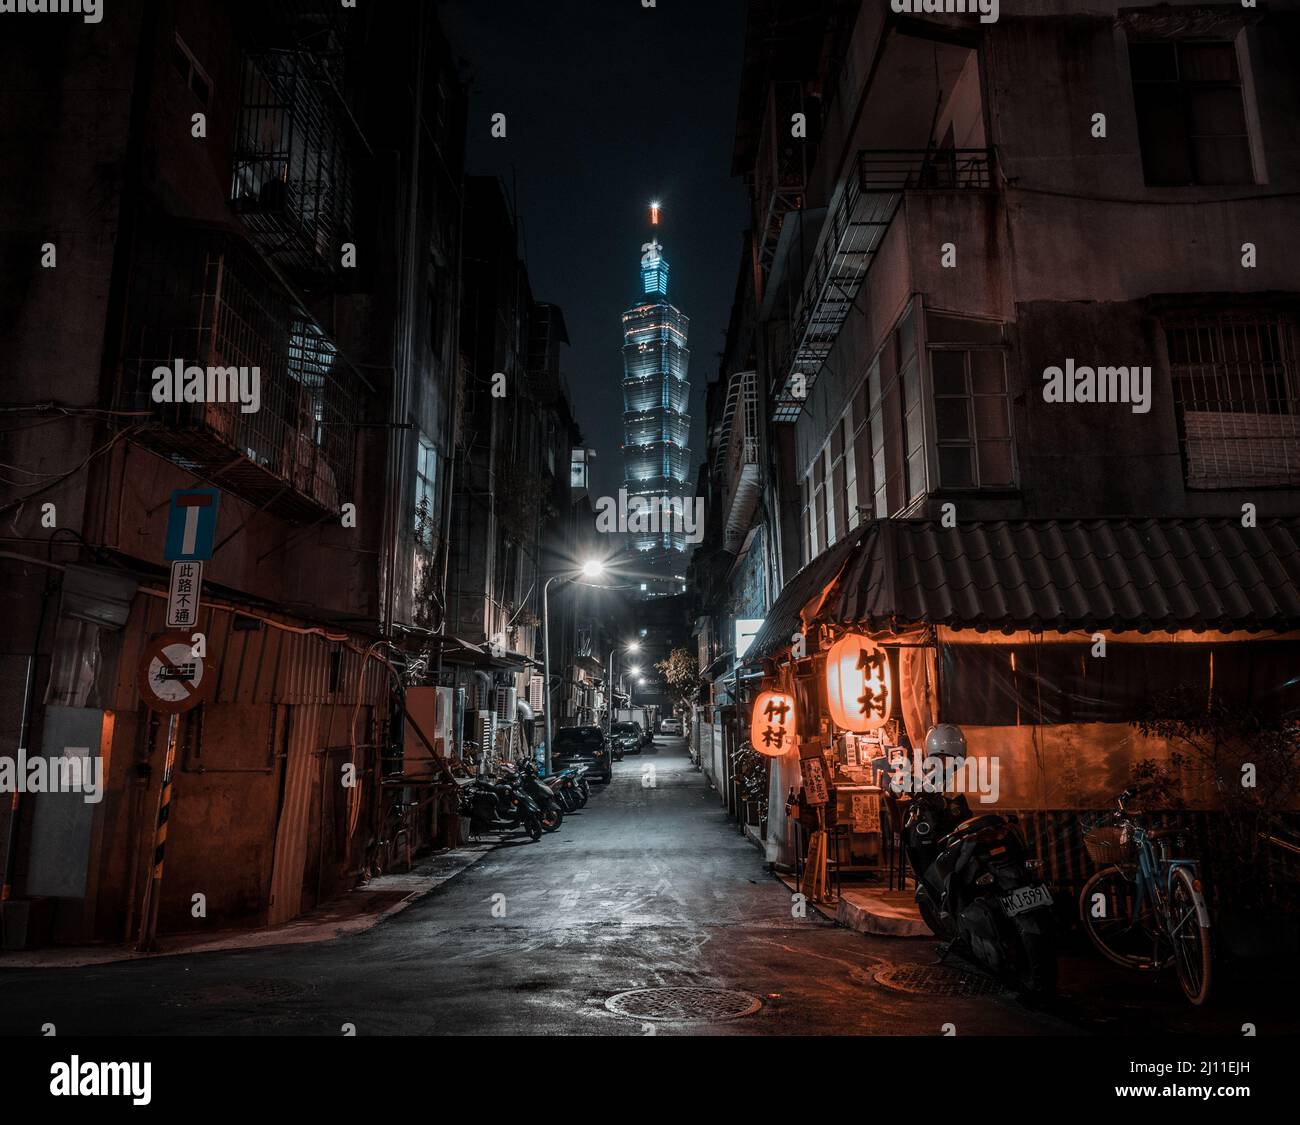 A popular view of Taipei 101 from an alley at night, with a popular Japanese izakaya restaurant in the foreground. Stock Photo